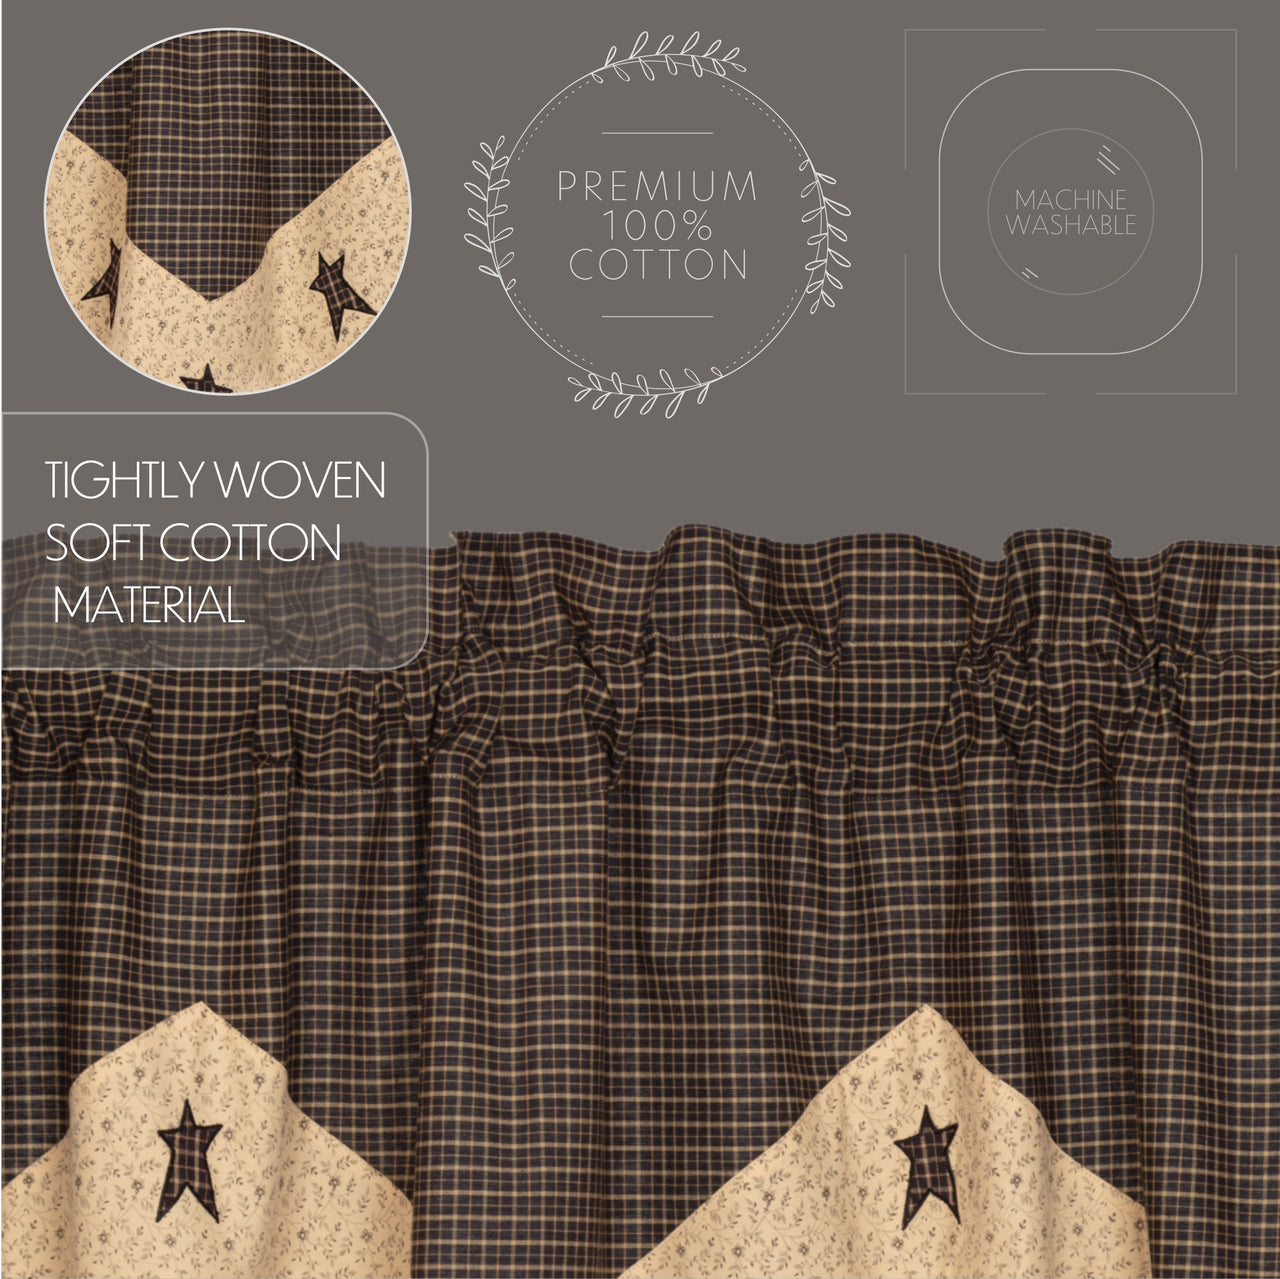 Kettle Grove Star Valance Curtain Country Black VHC Brands